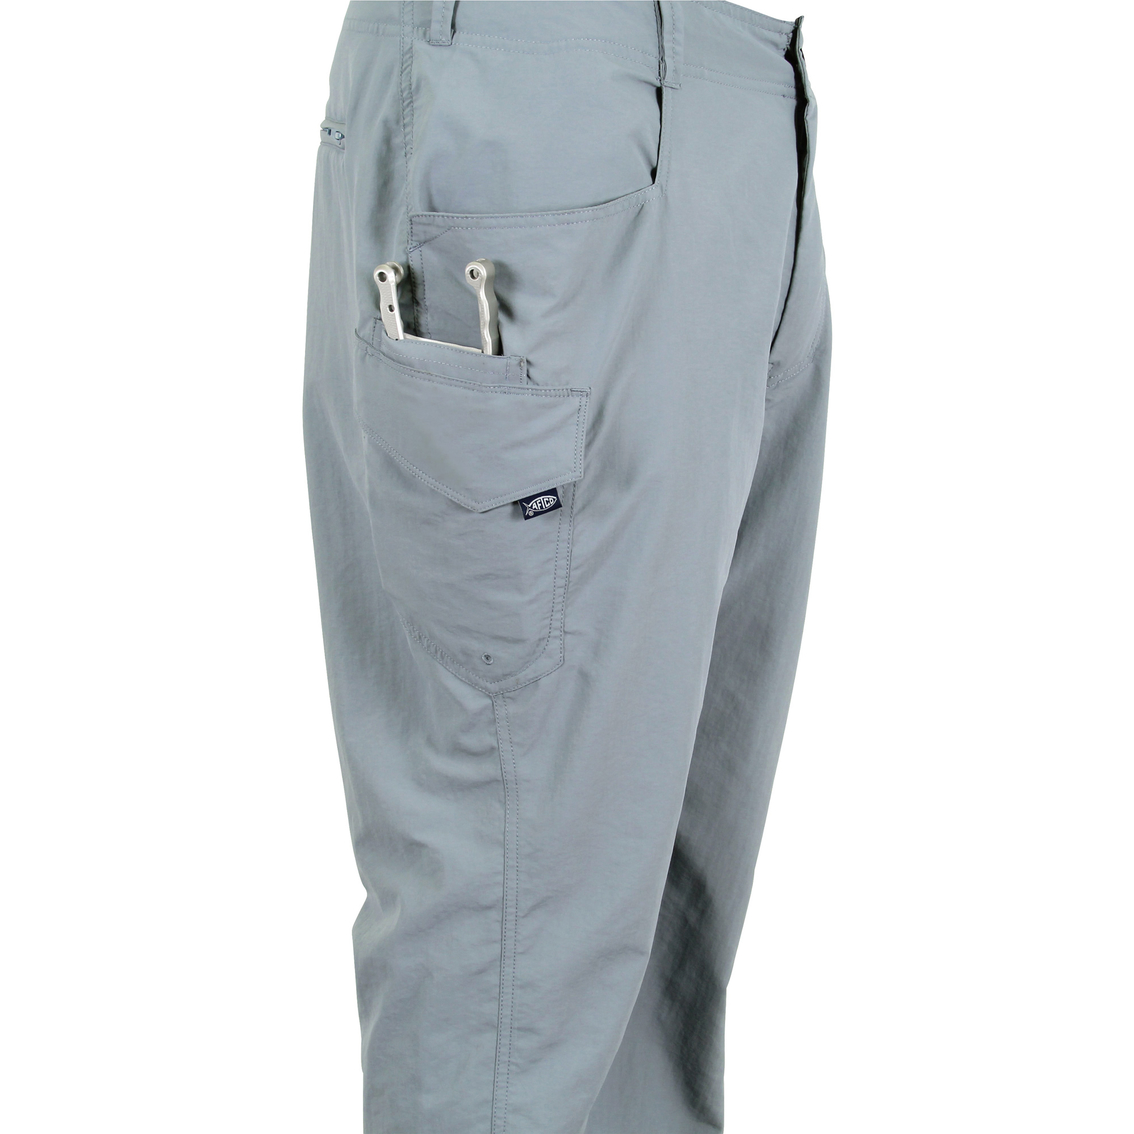 Aftco Gamma Ray Fishing Pants, Pants, Clothing & Accessories